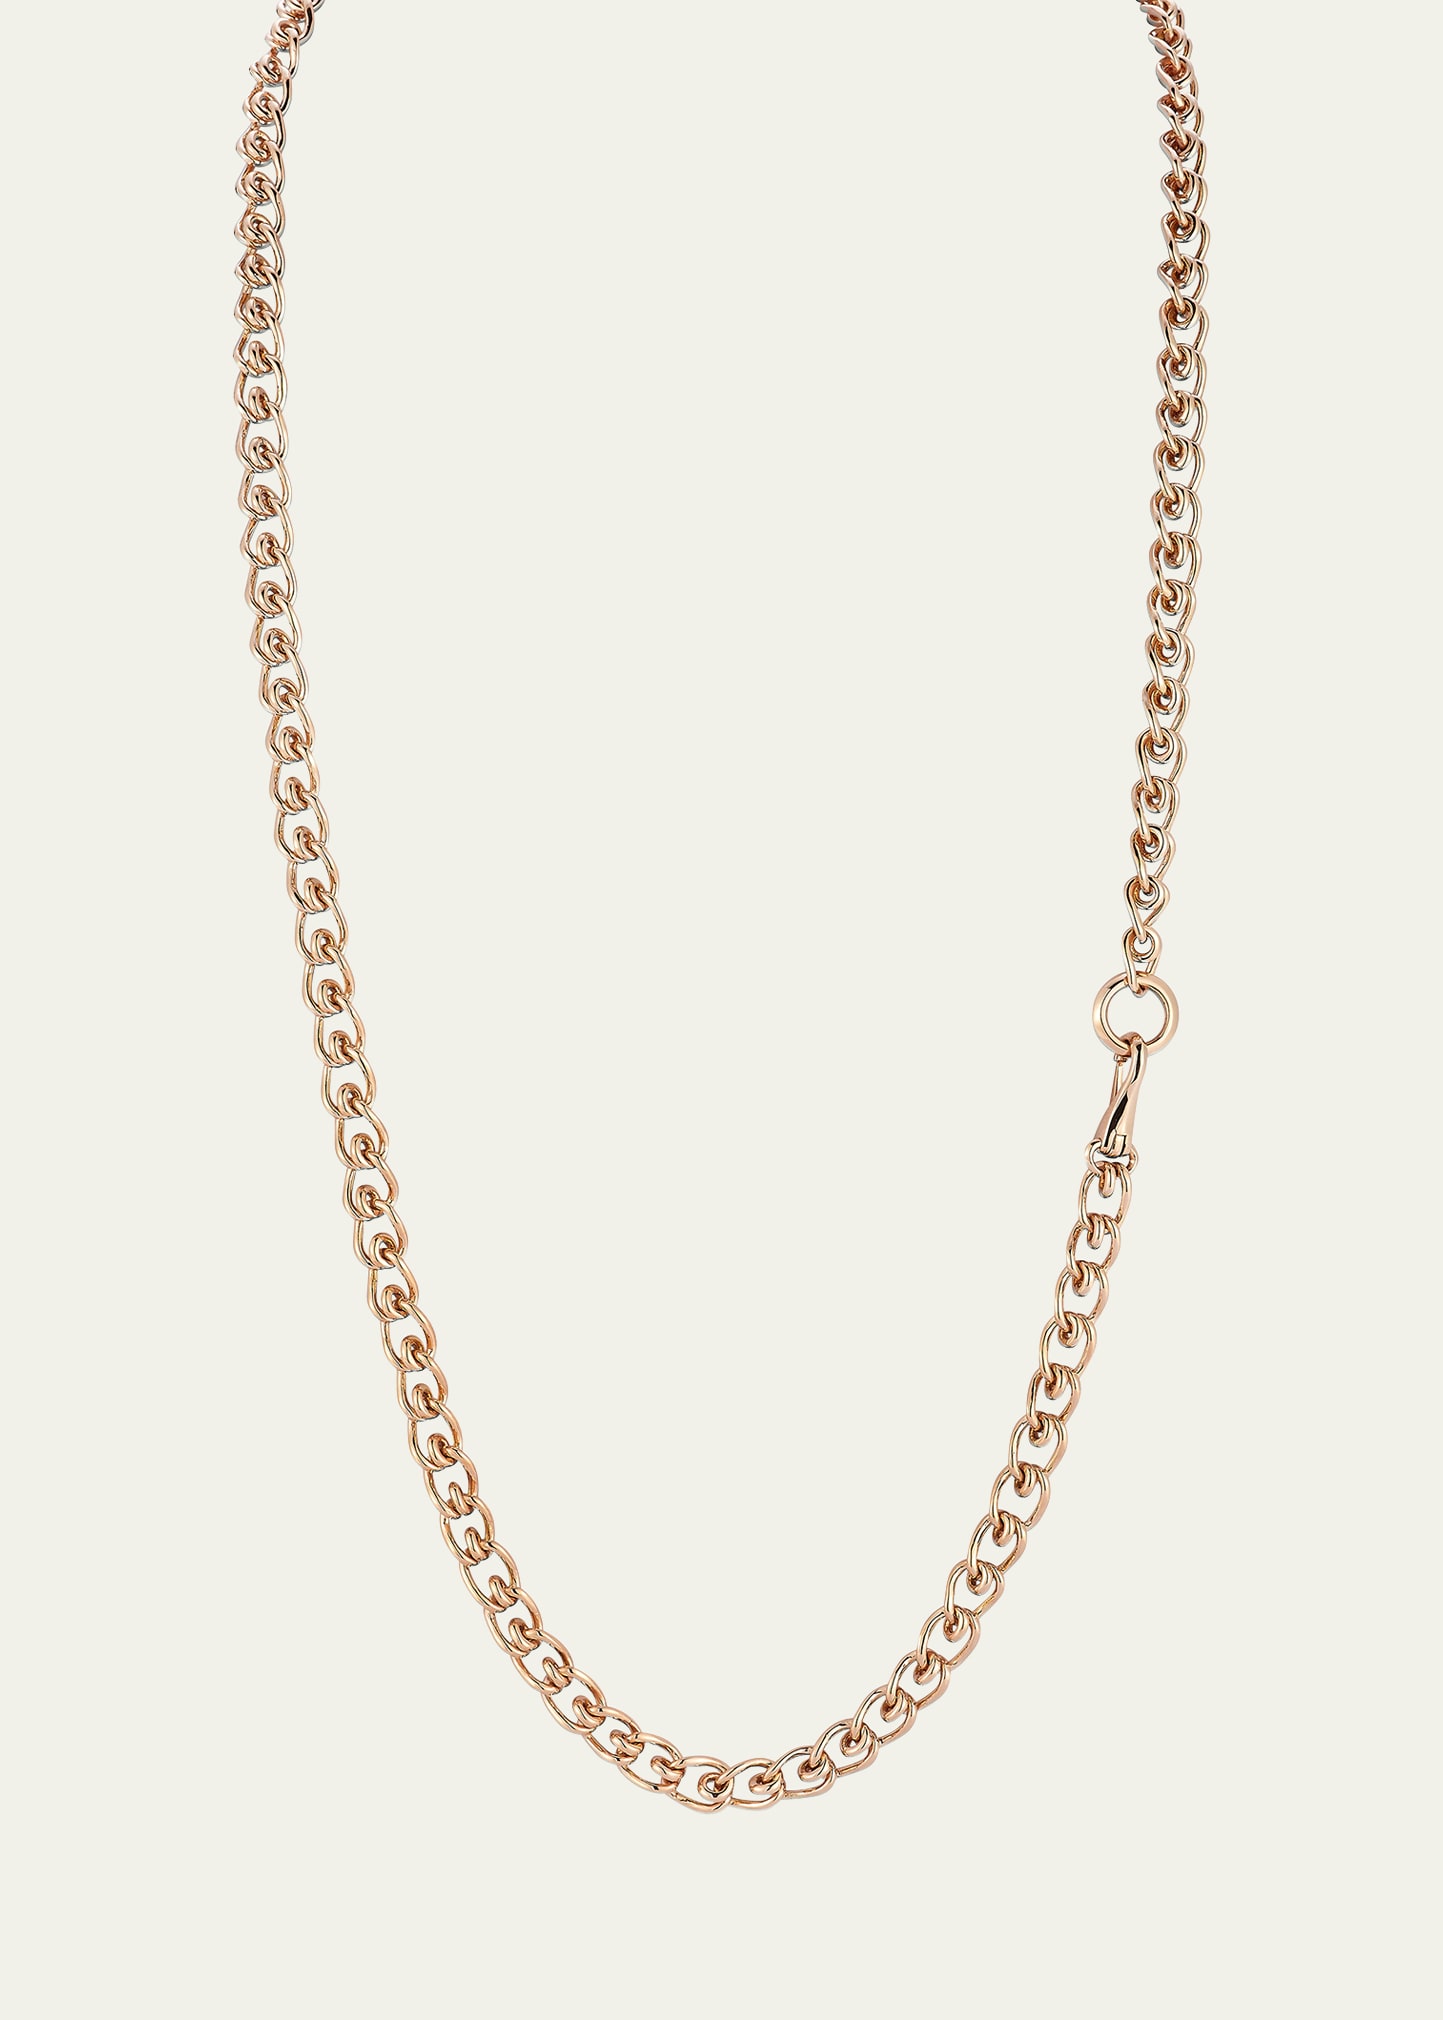 Walters Faith Huxley 18k Rose Gold Coil Chain Necklace